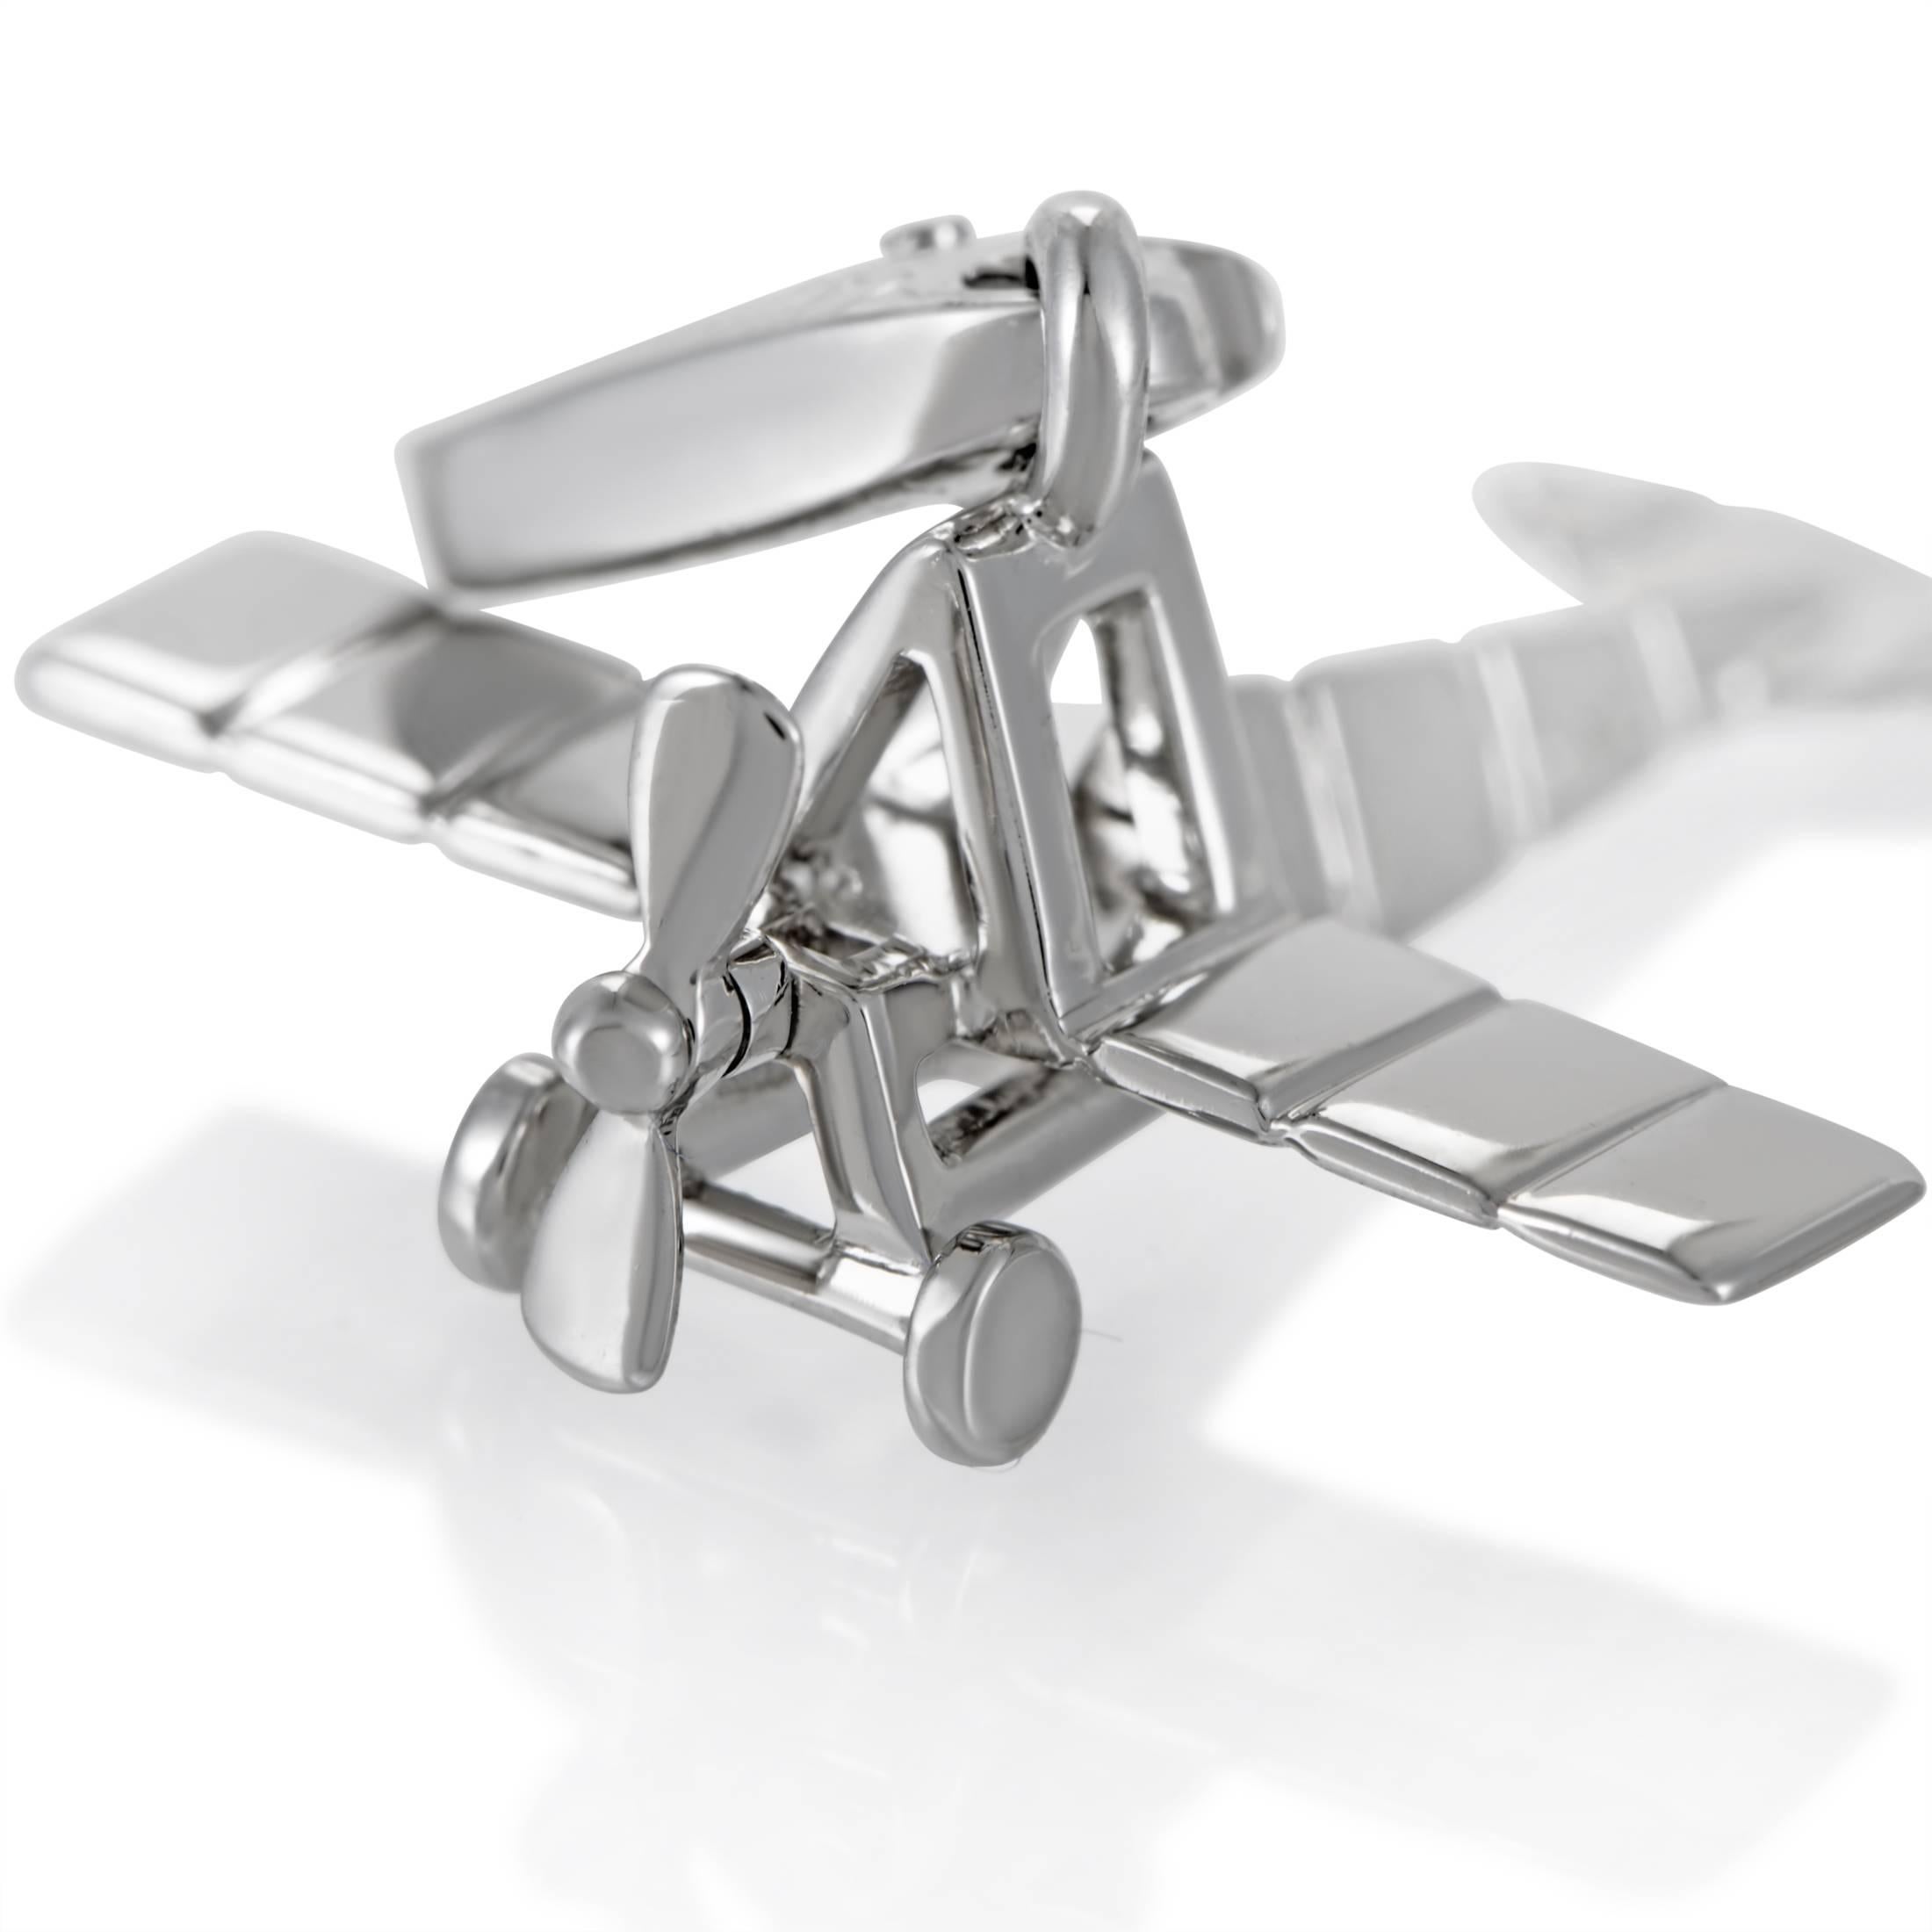 Designed in the adorable and intriguing form of an airplane, this nifty charm from Cartier showcases the brand’s renowned expertise in manipulating precious materials, boasting an impeccable gleam of 18K white gold.
Included Items: Manufacturer's